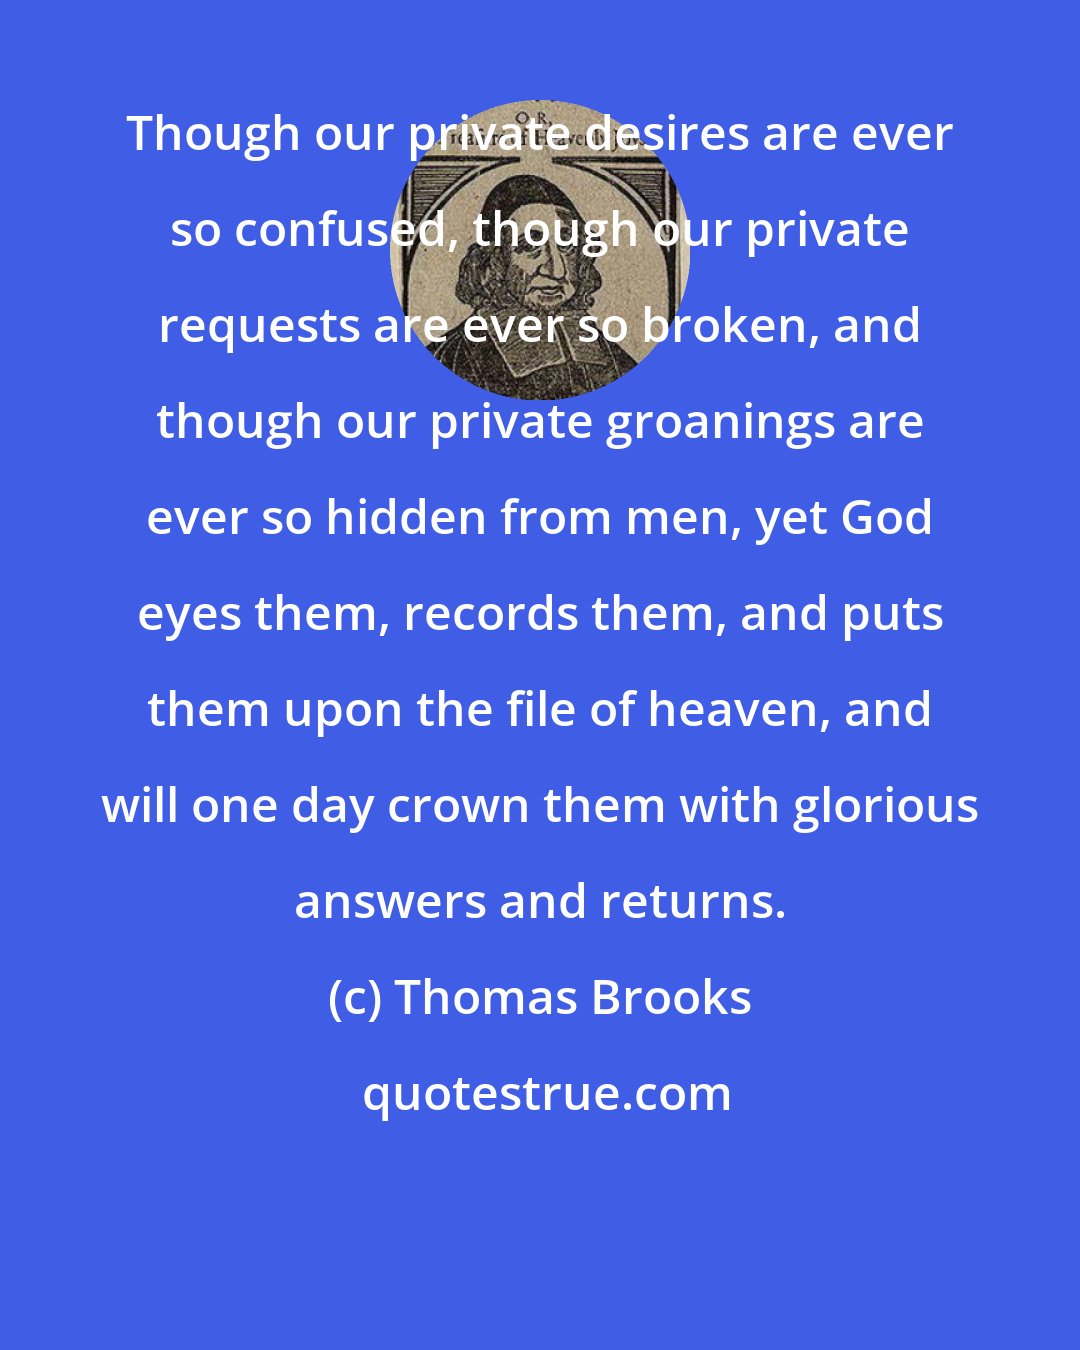 Thomas Brooks: Though our private desires are ever so confused, though our private requests are ever so broken, and though our private groanings are ever so hidden from men, yet God eyes them, records them, and puts them upon the file of heaven, and will one day crown them with glorious answers and returns.